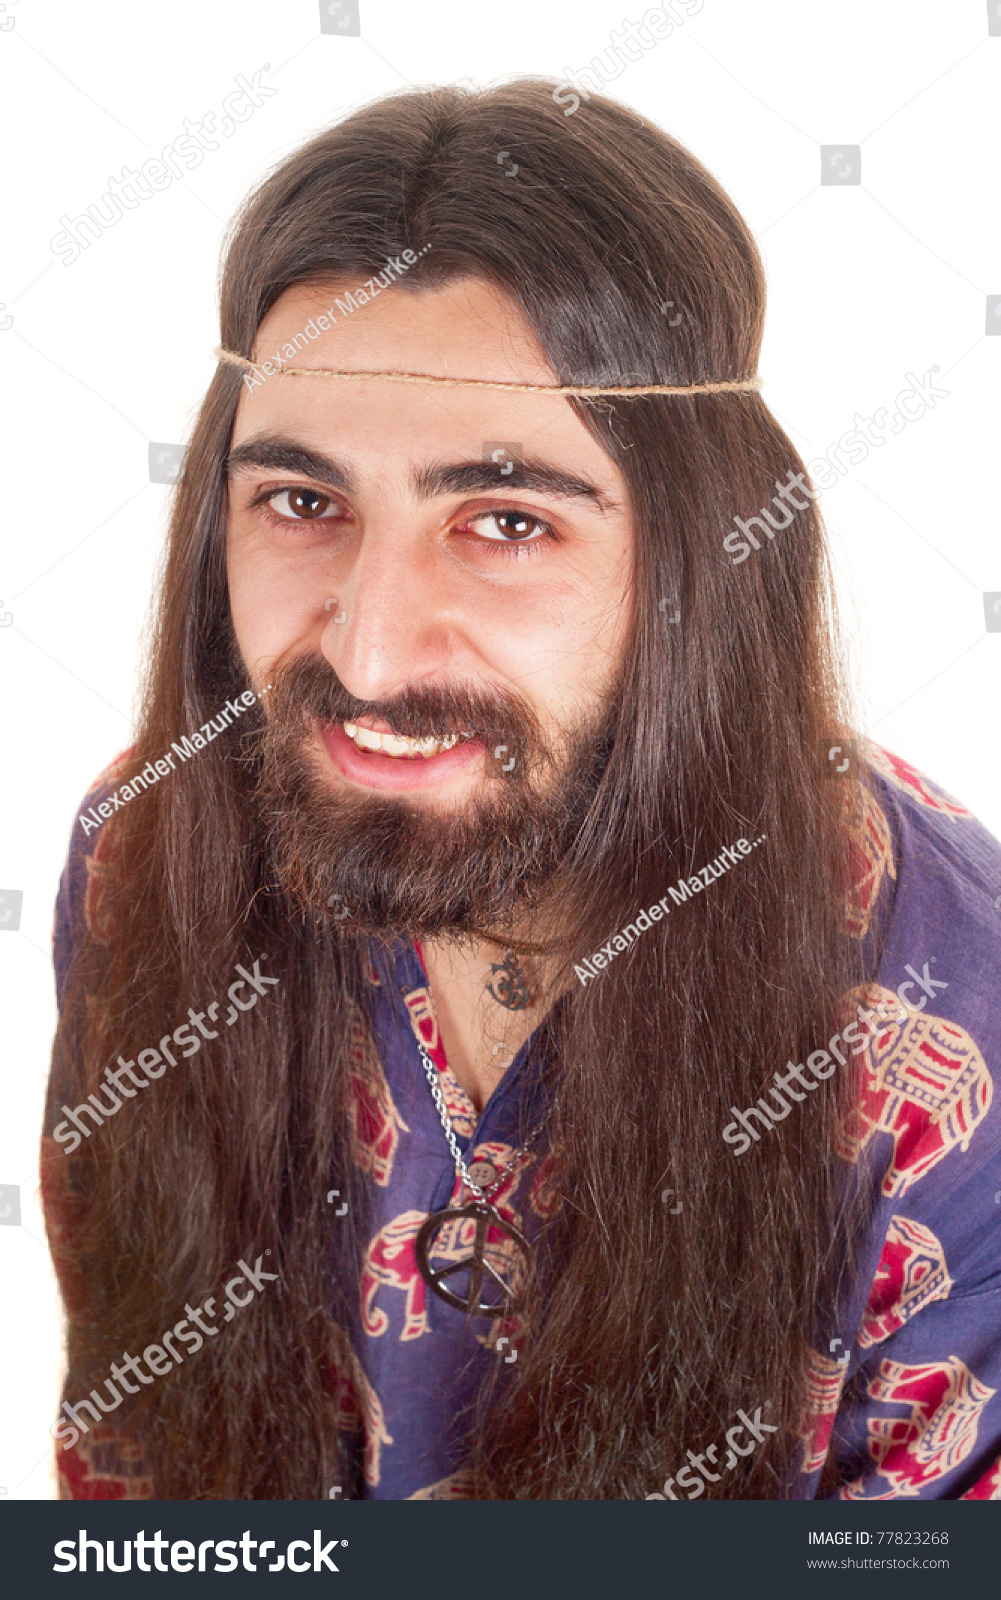 Longhaired Smiling Hippie Man Stock Photo 77823268 - Shutterstock